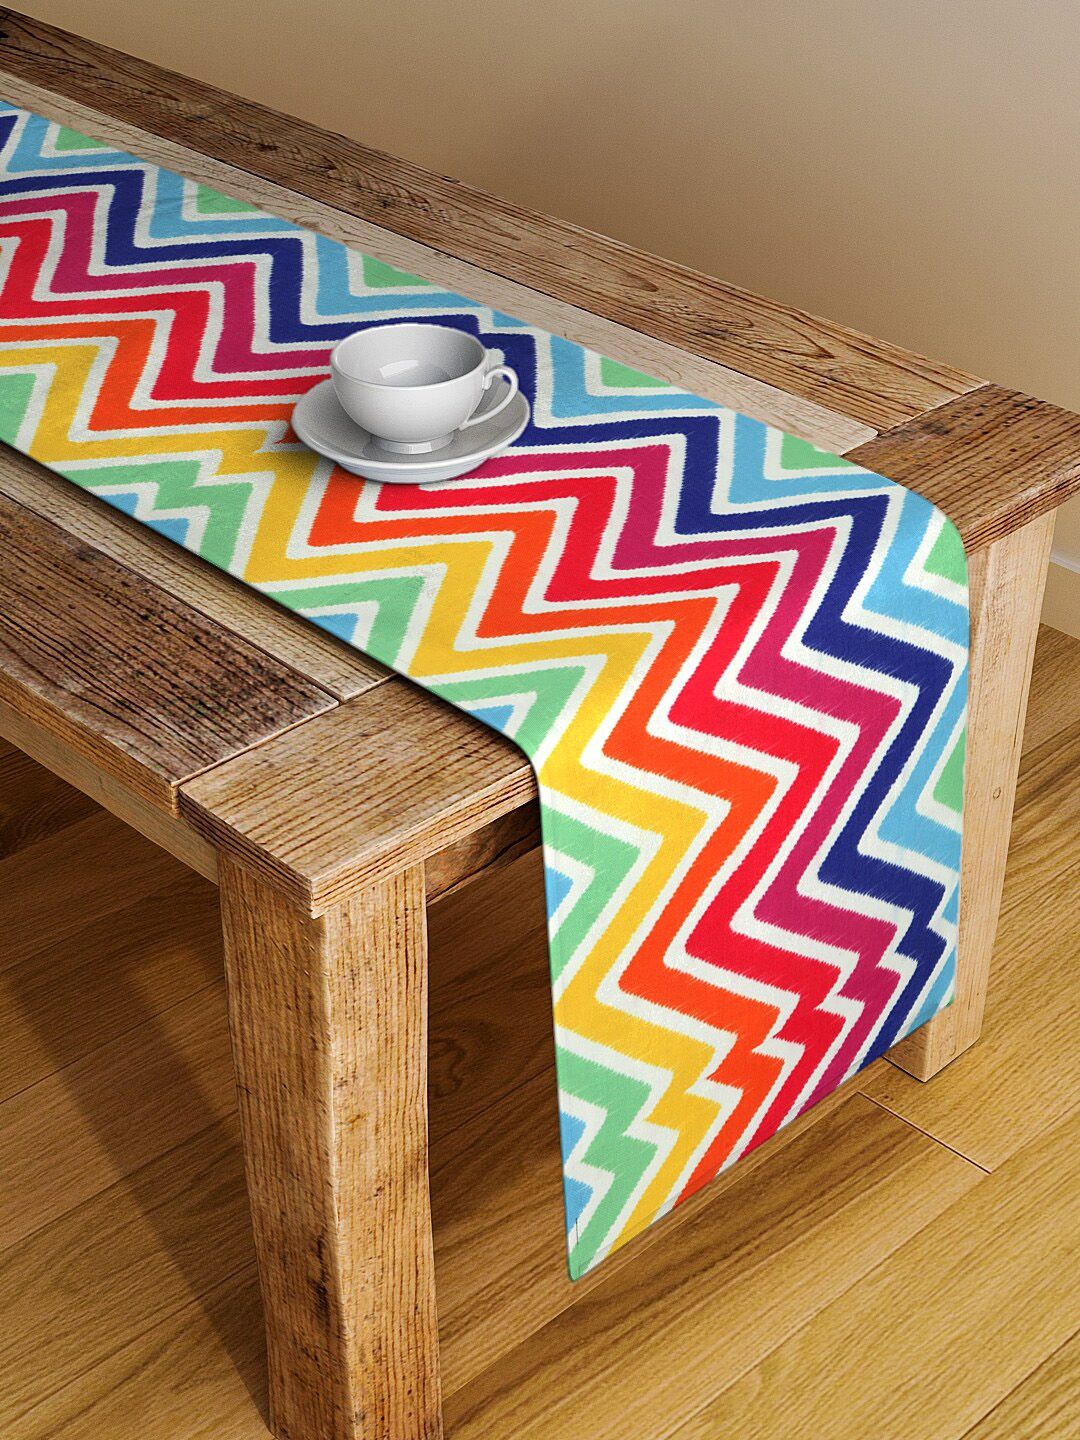 Alina decor Red & Blue Digital Printed Chevron Table Runner Price in India